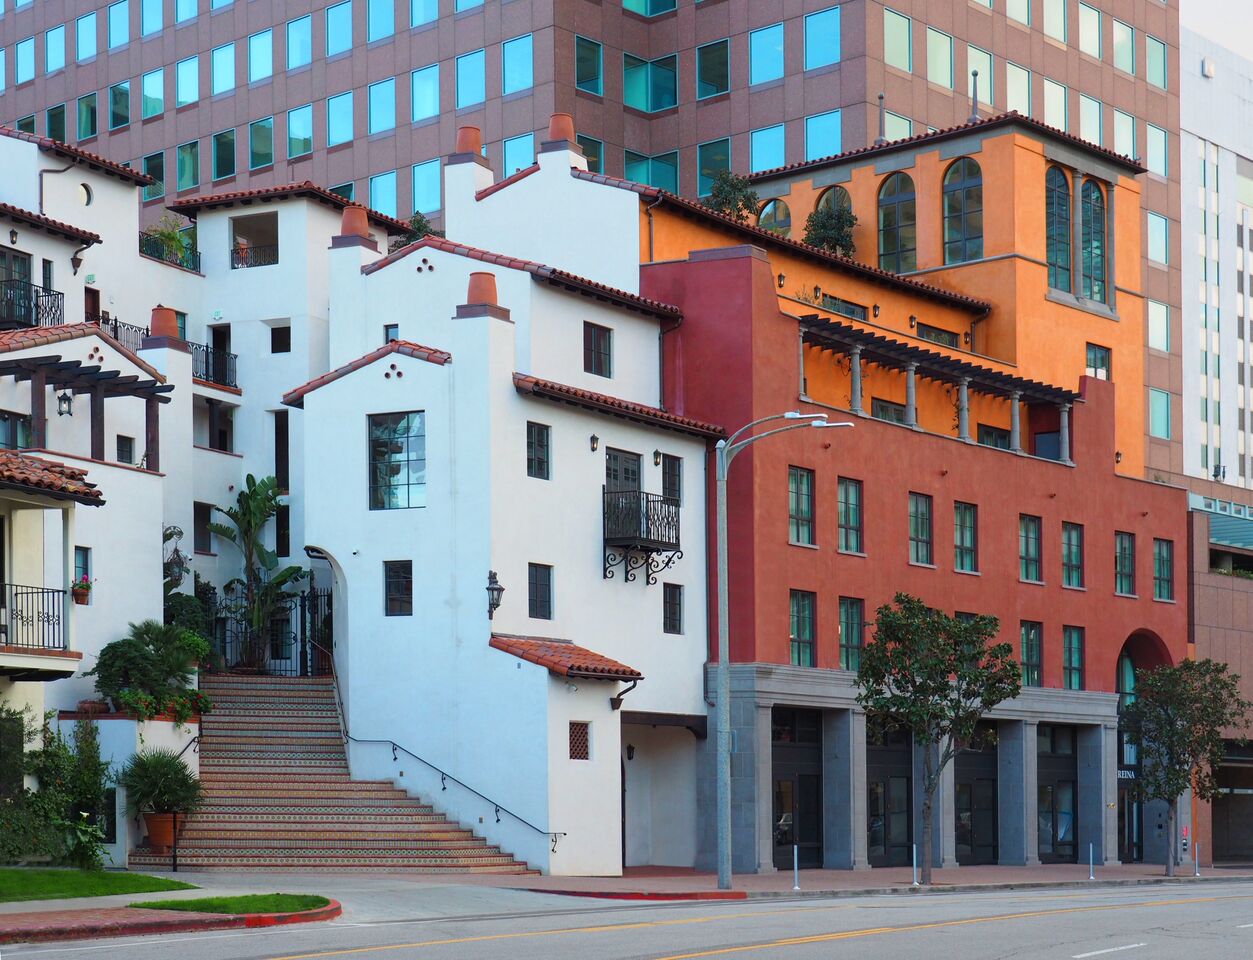 The 44-unit Plaza La Reina hotel was developed by Los Angeles commercial real estate investor and owner Kambiz Hekmat